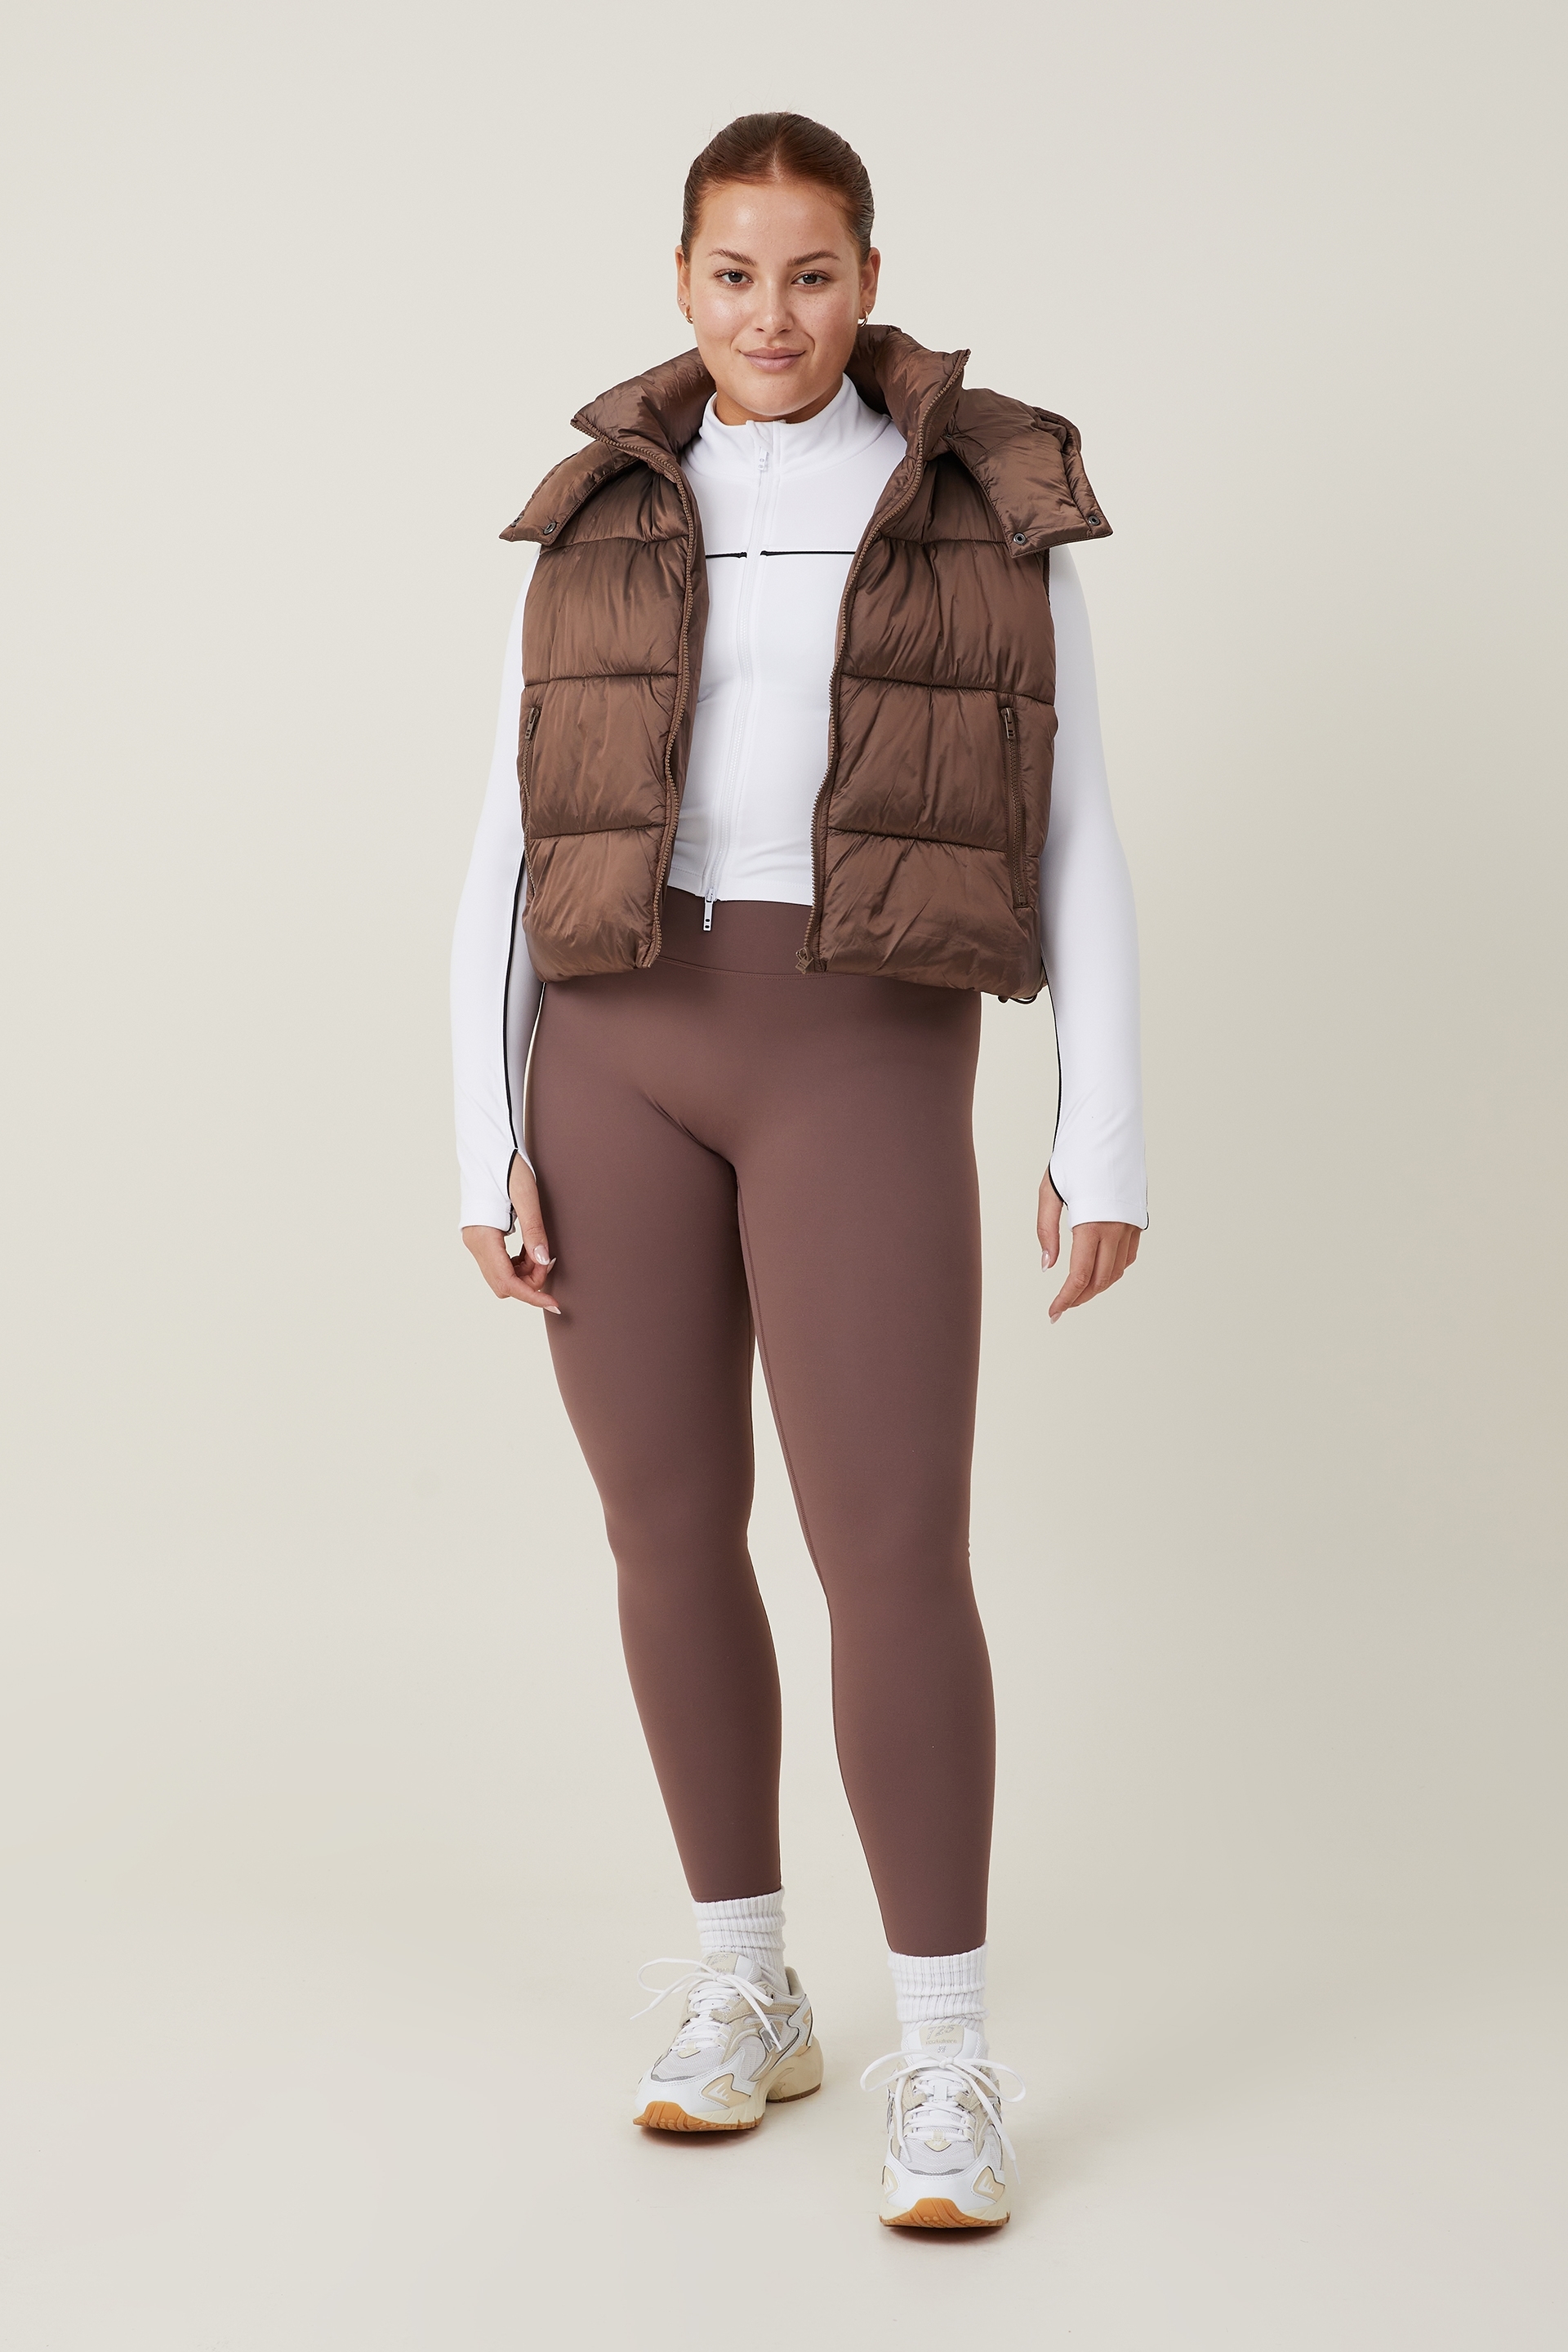 Body - The Recycled Mother Hooded Puffer Vest 2.0 - Deep taupe